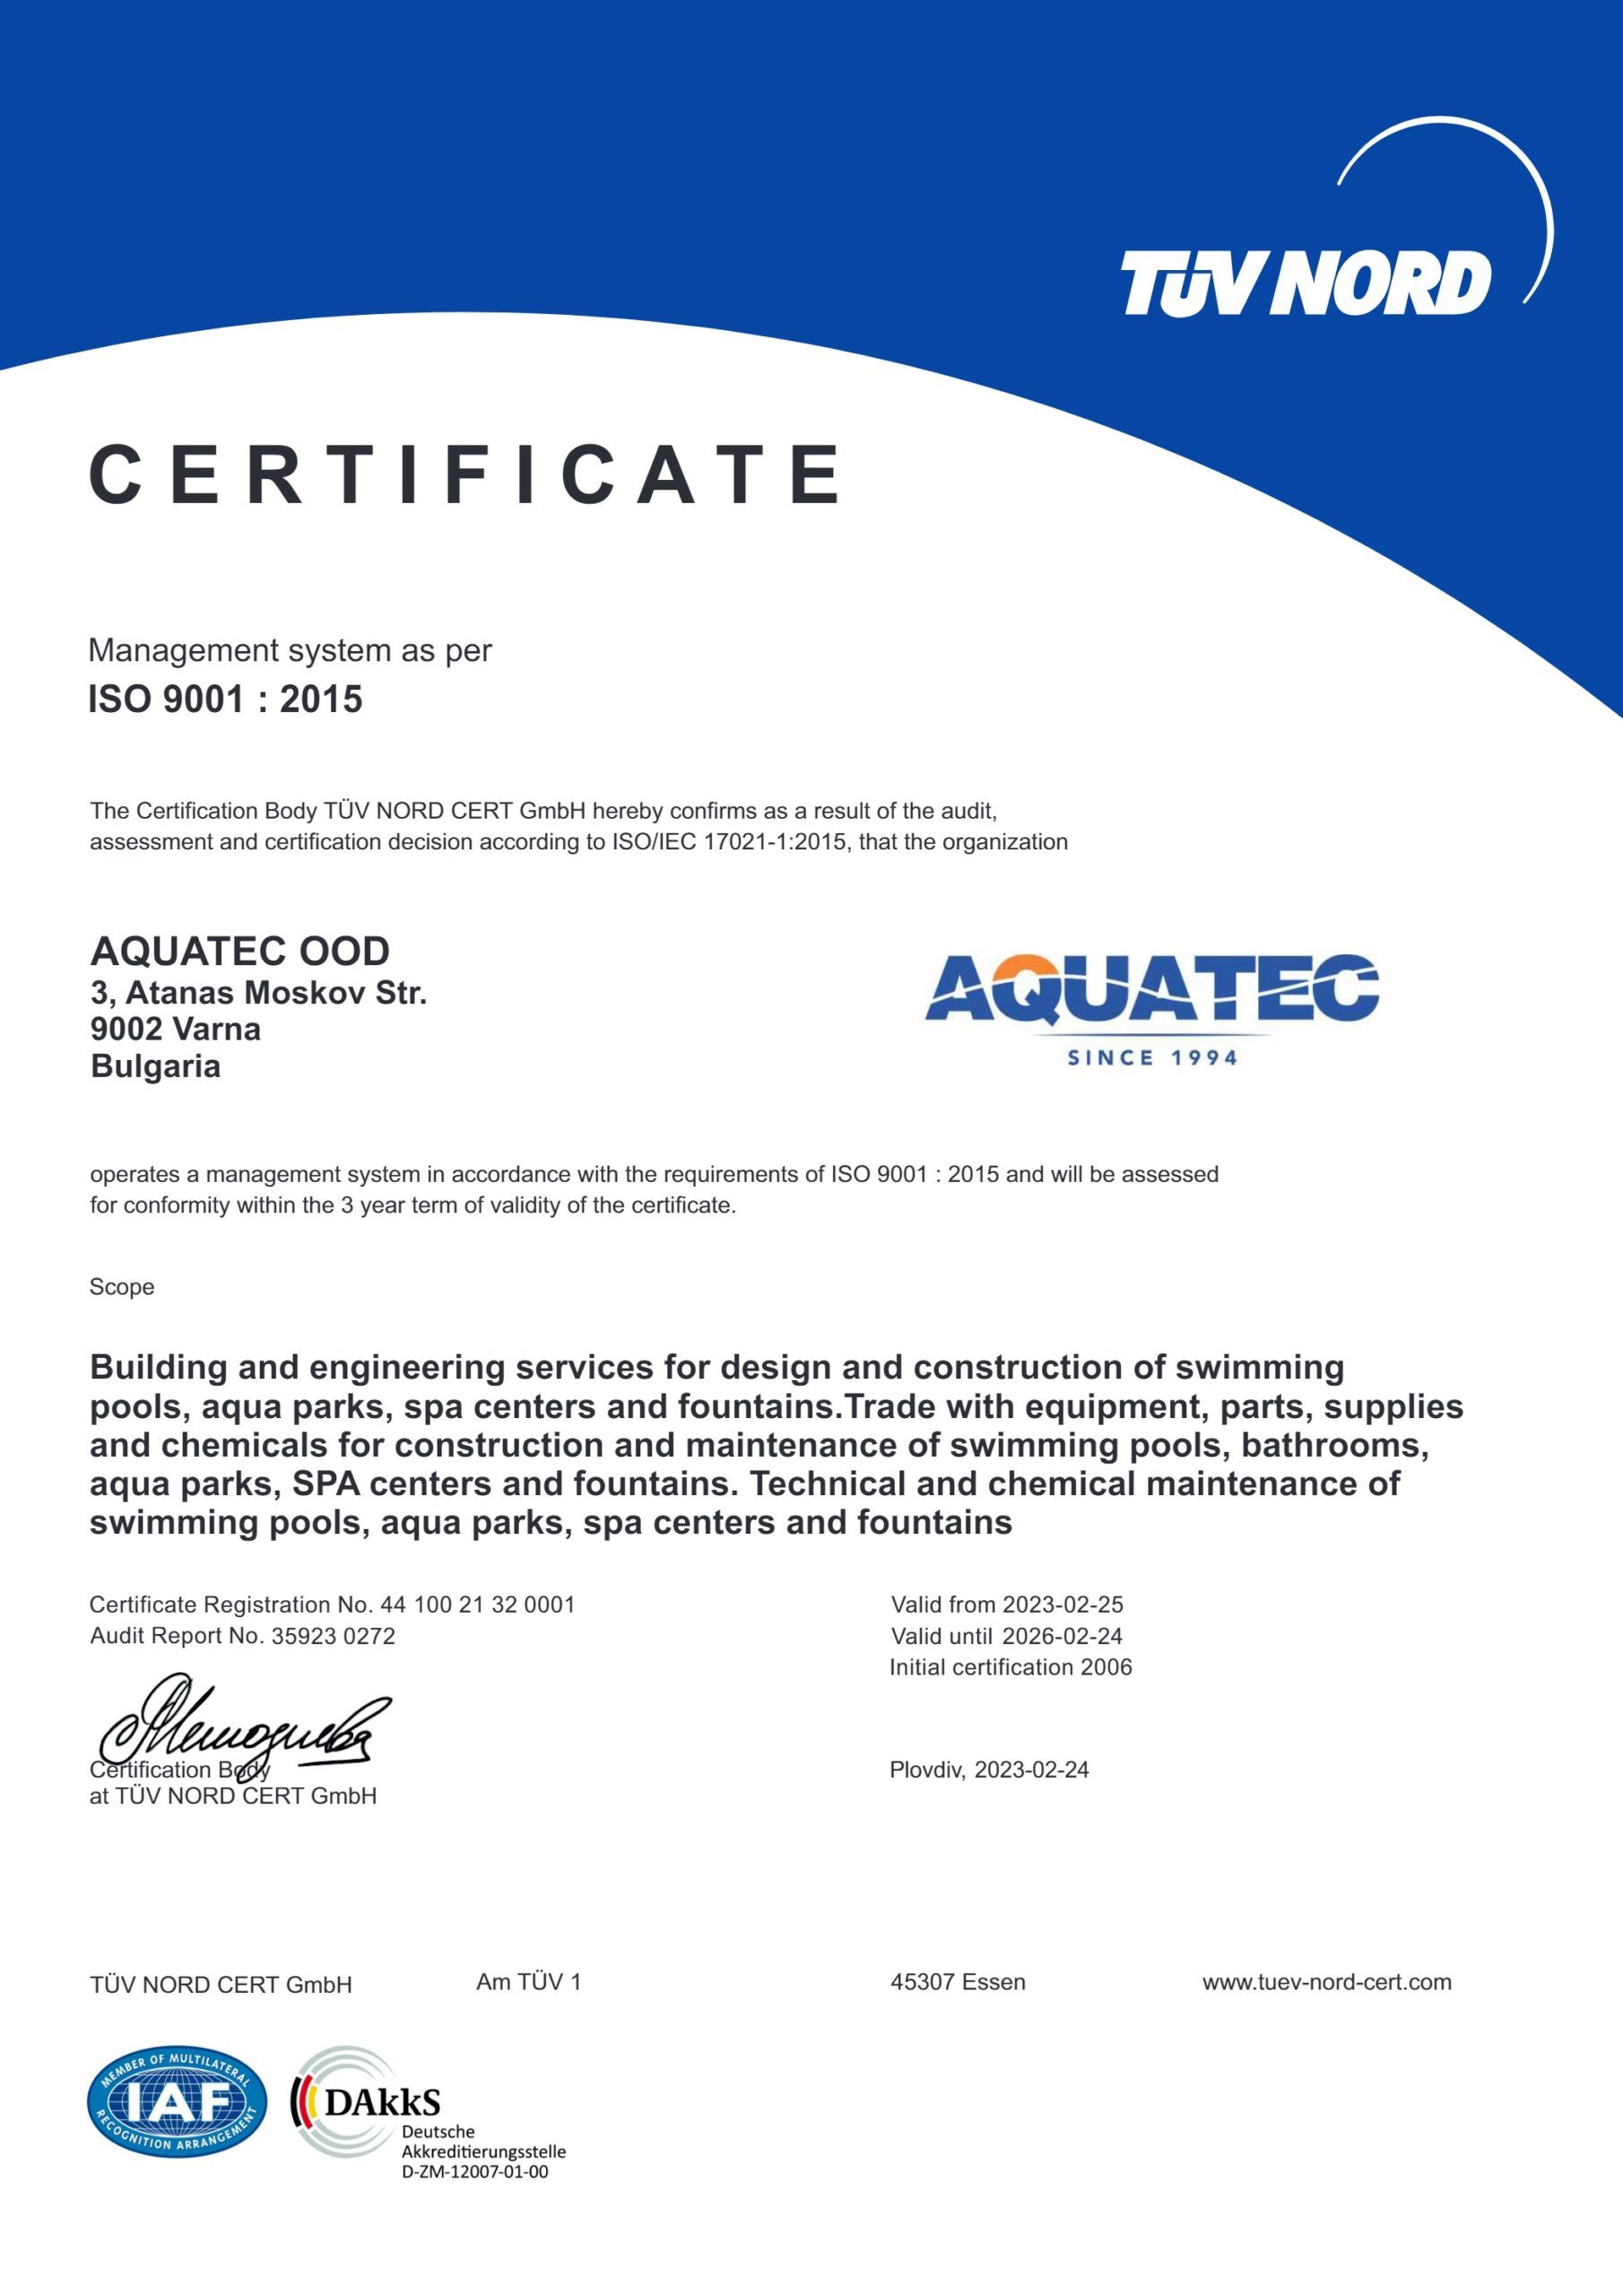 CERTIFICATE ACCORDING TO ISO 9001 : 2015